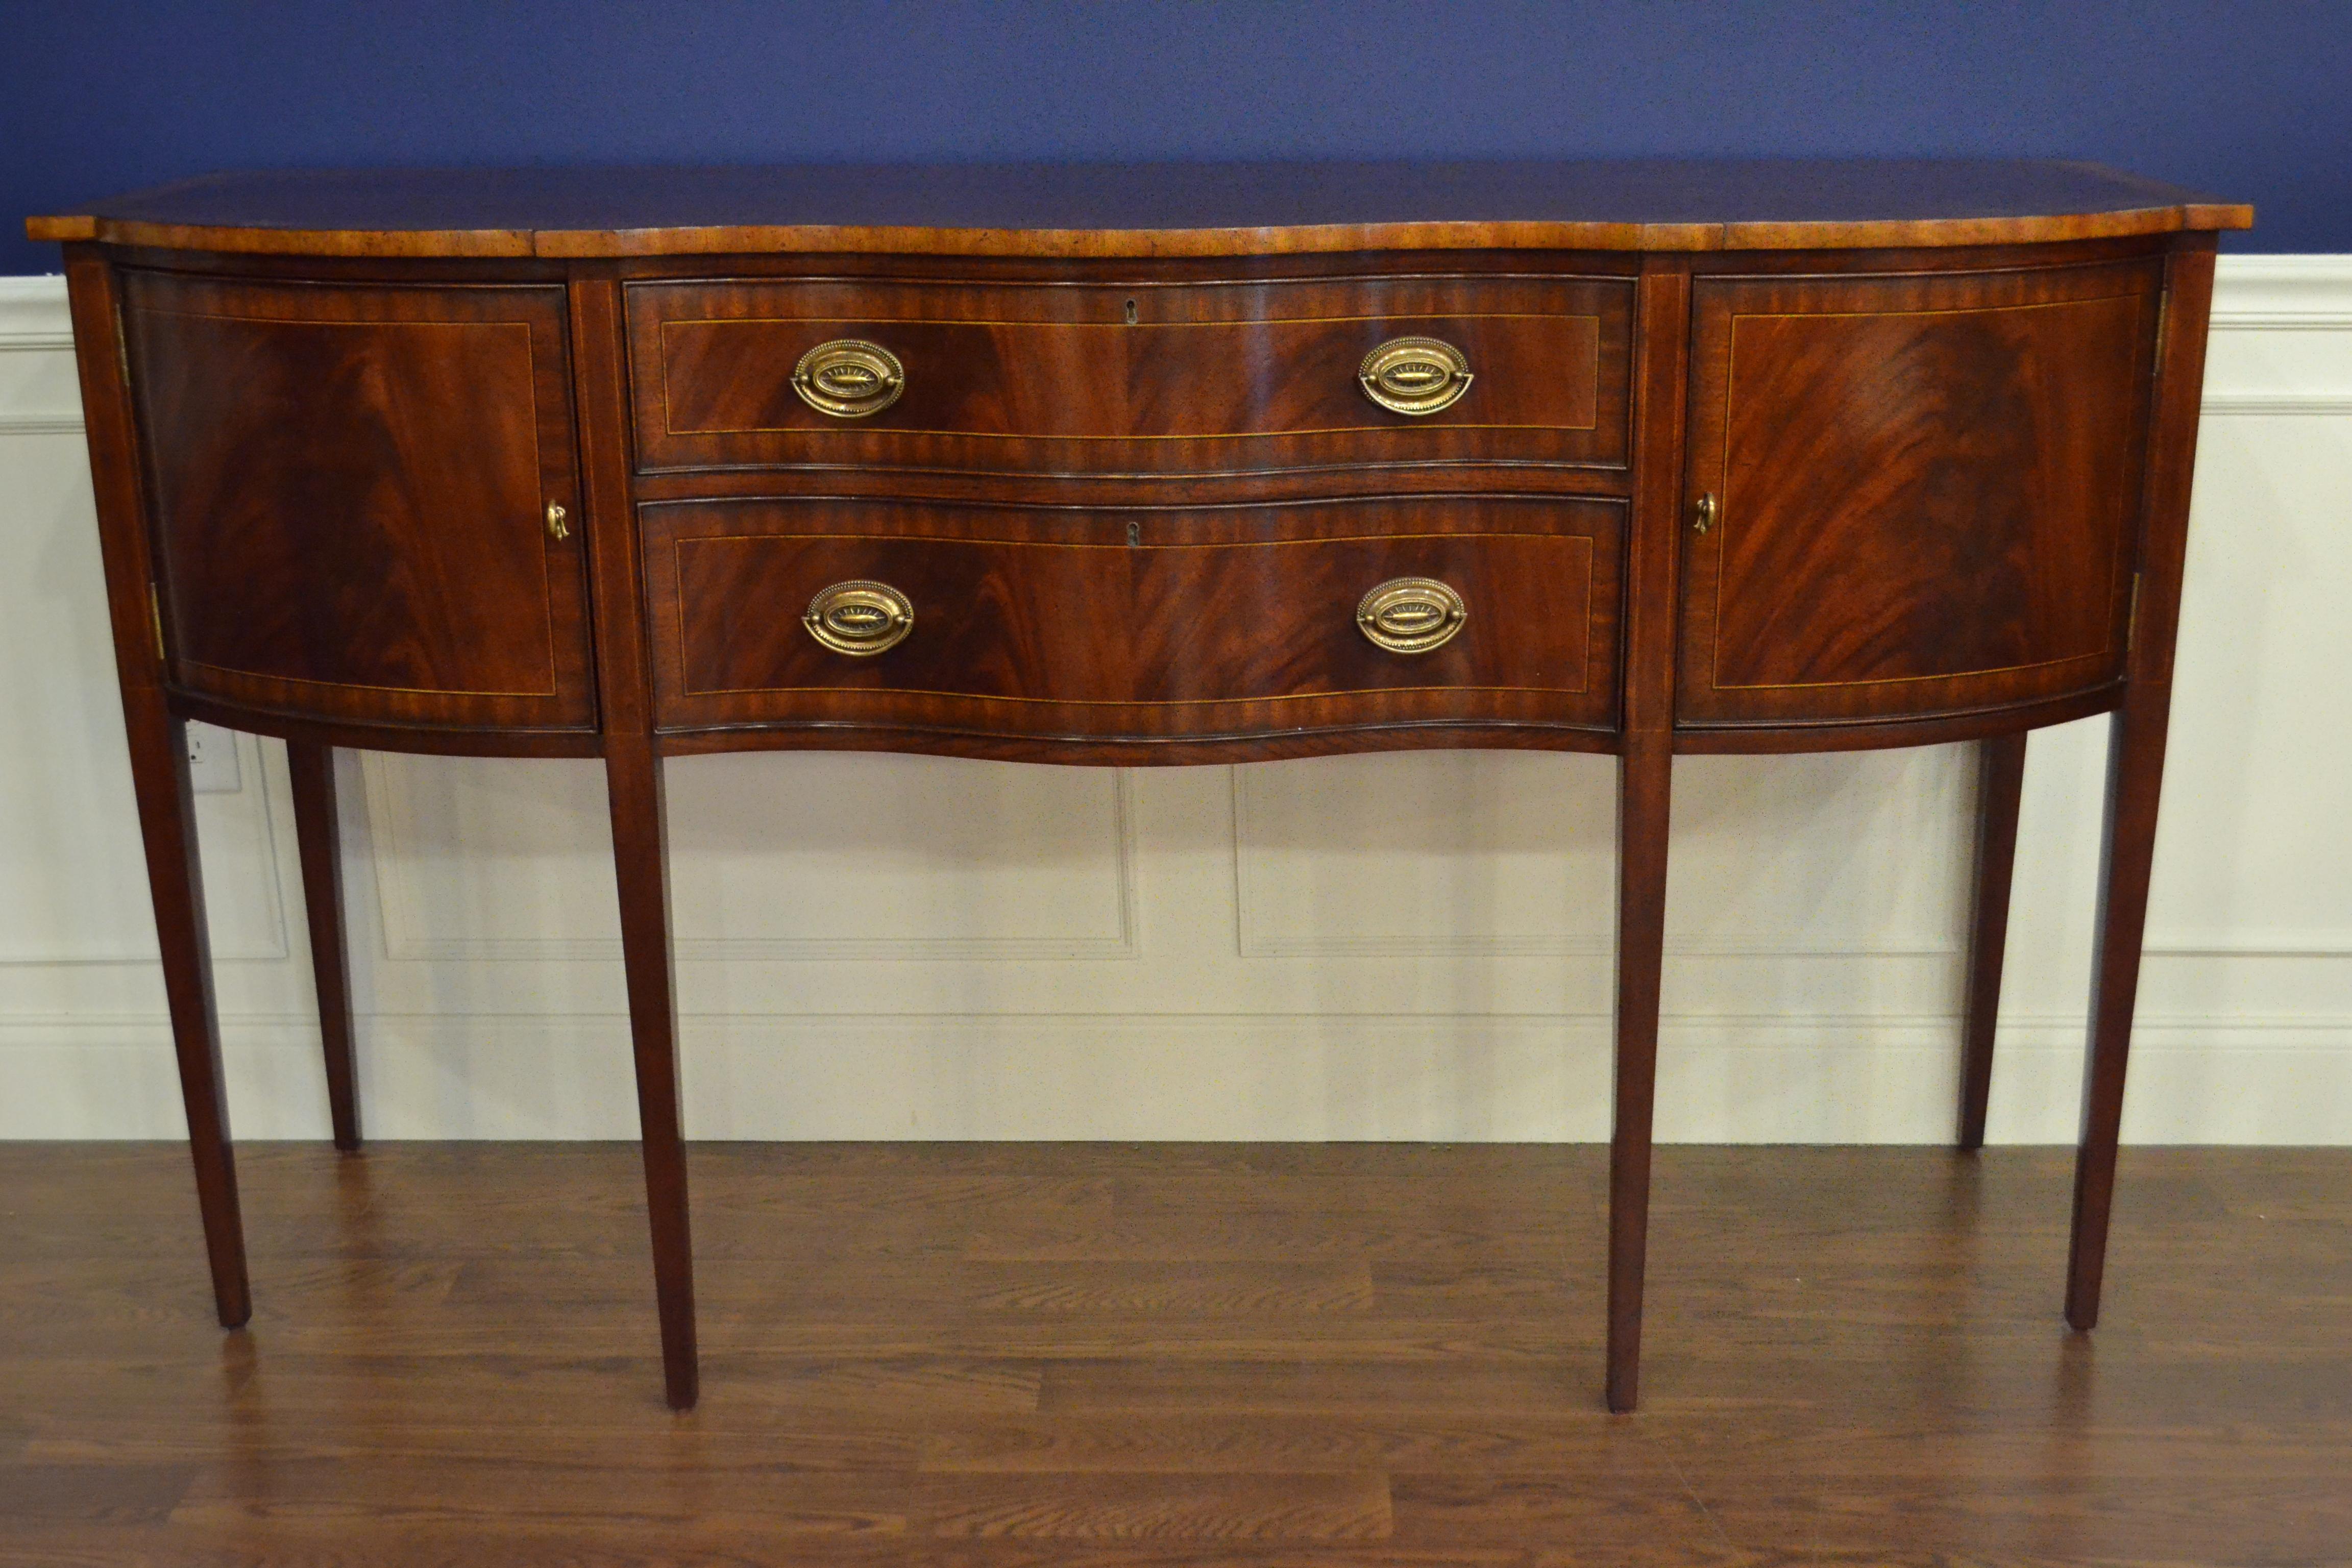 This is a new traditional mahogany sideboard. It’s design was inspired by the Hepplewhite sideboards from the Regency period and features a Classic serpentine shaped front. It features doors, drawers and a top with swirly crotch mahogany fields and